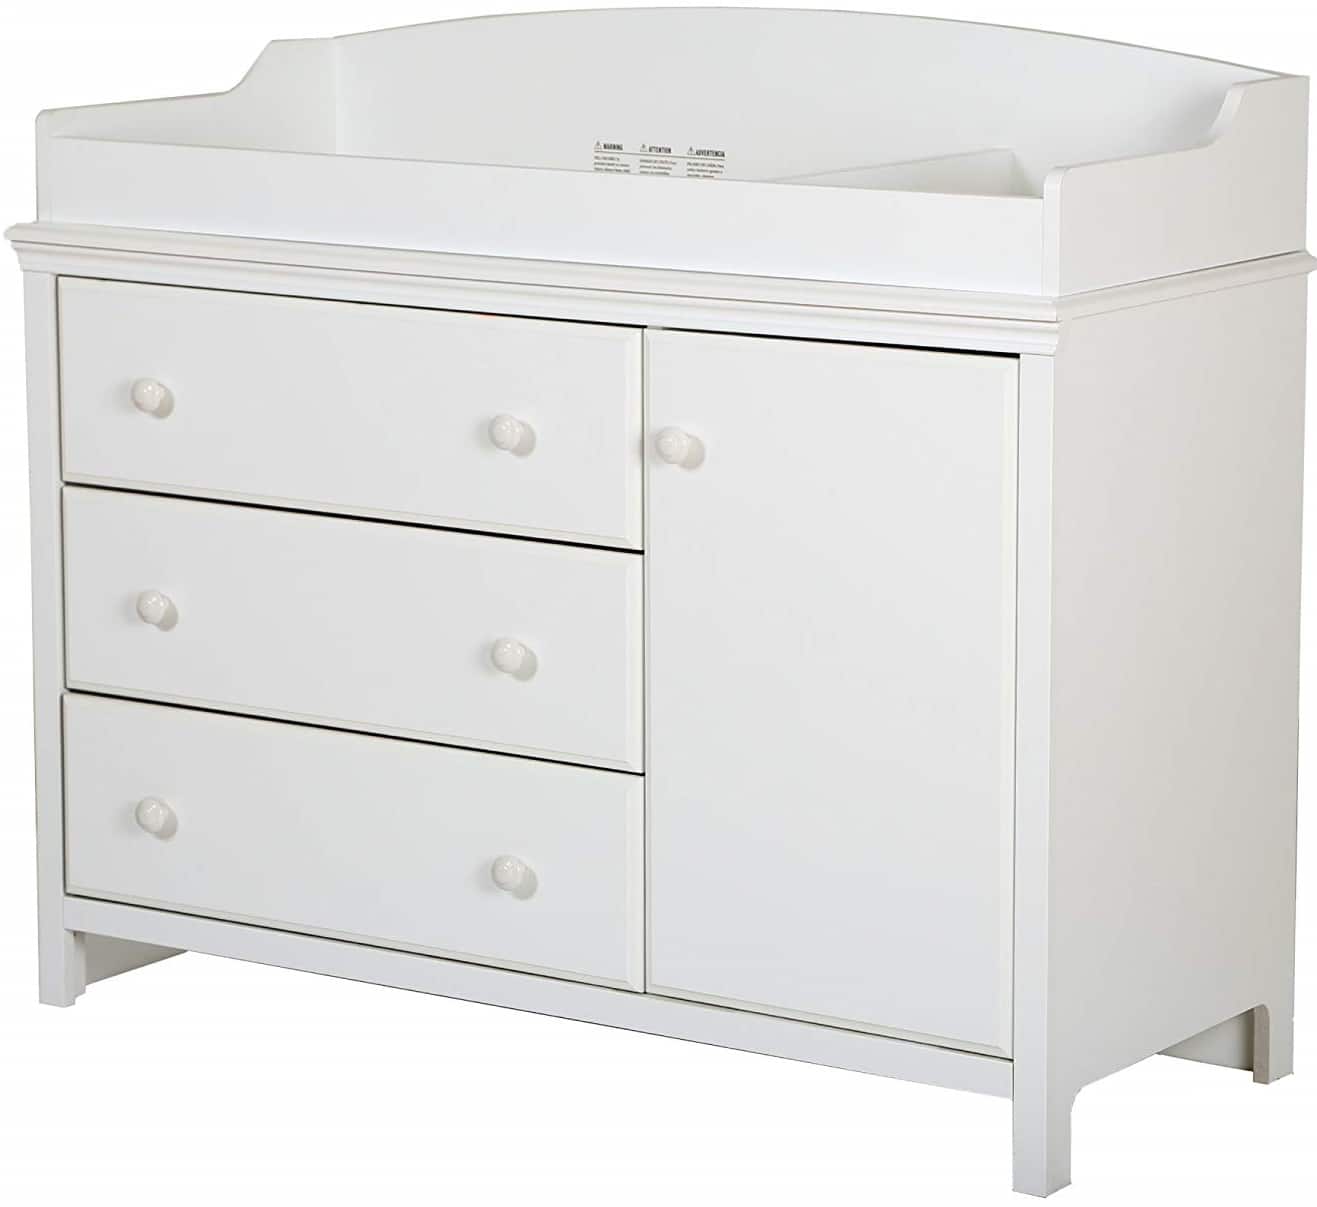 South Shore Convertible Changing Table